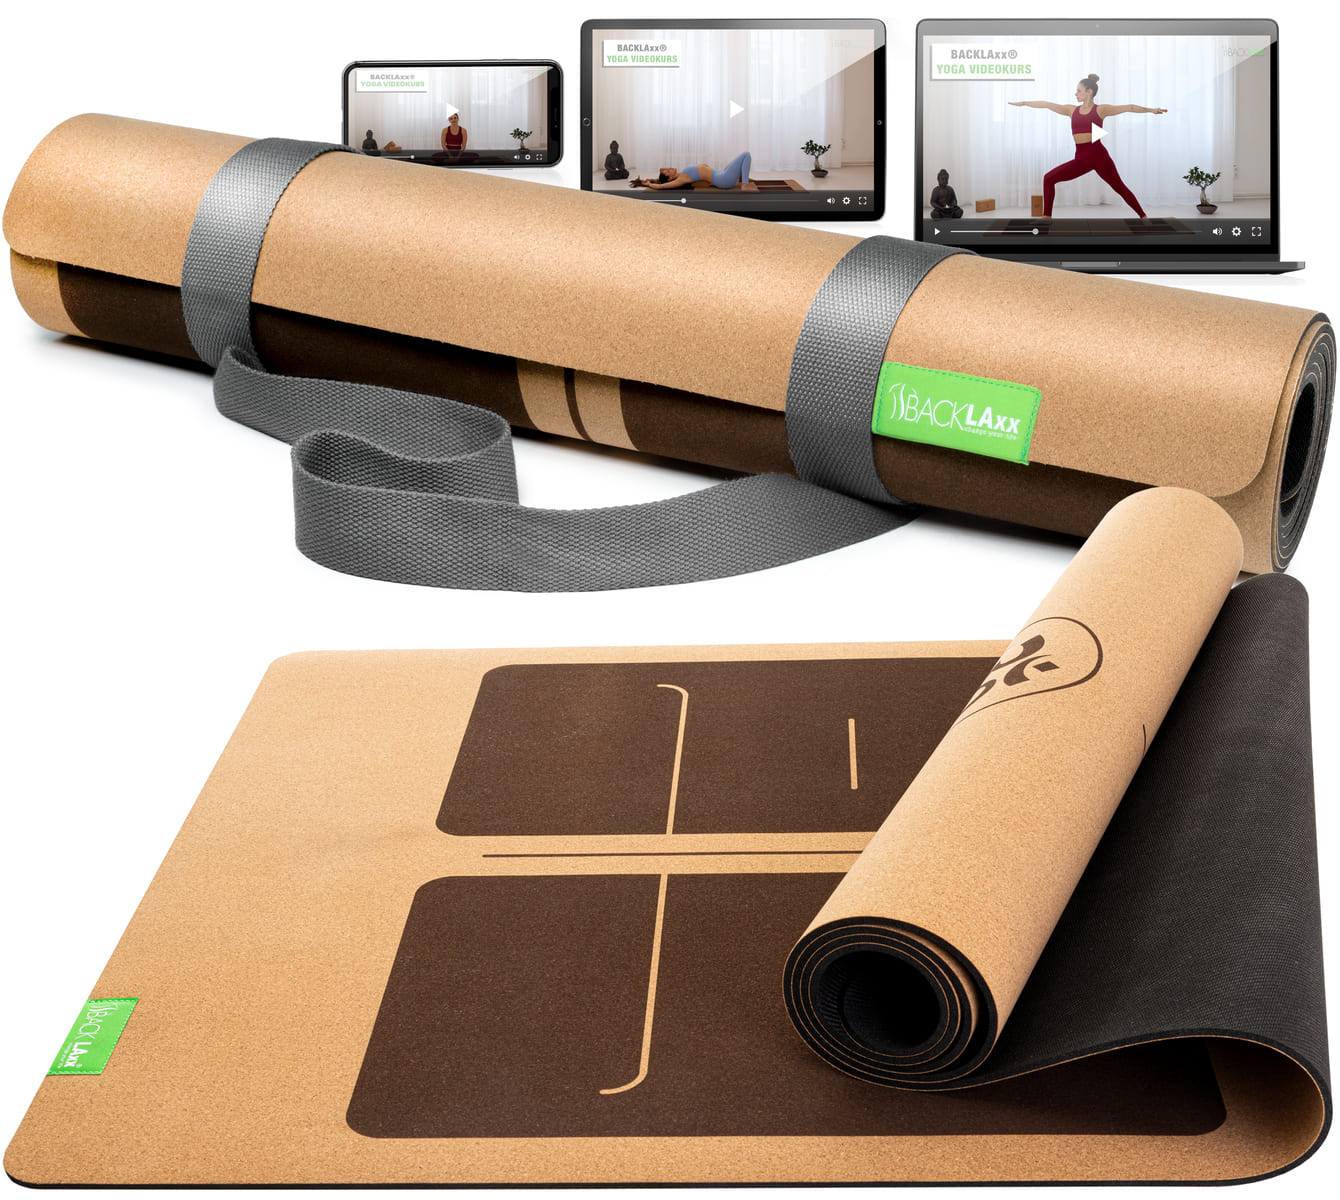 Yoga mat (incl. free video course)